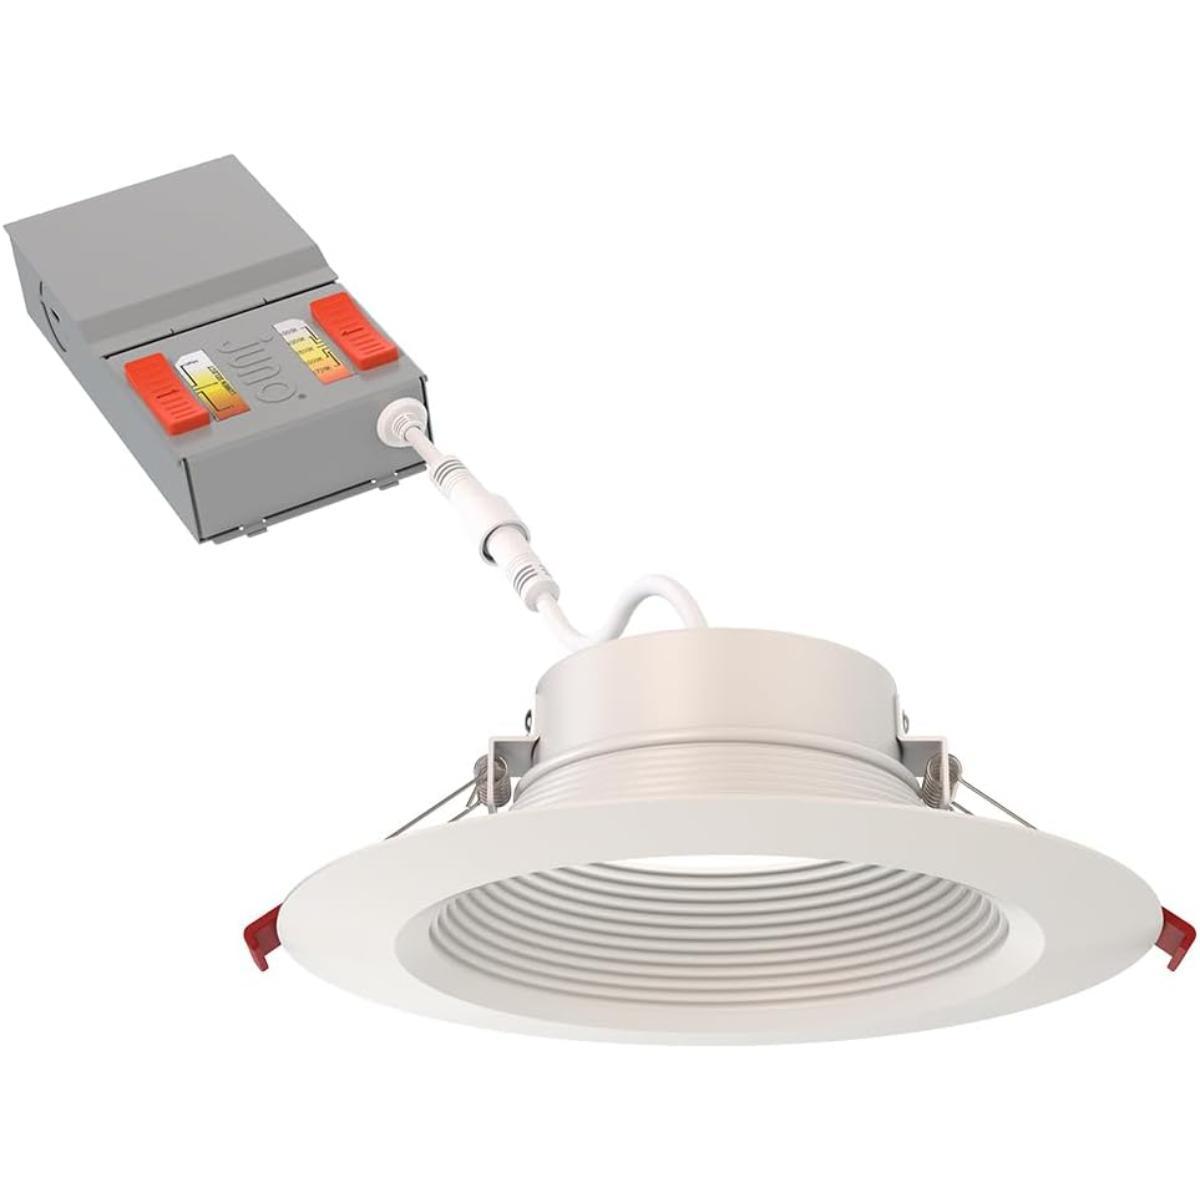 6 inch Wafer Canless LED Recessed Light, 16 Watt, 1300 Lumens, Selectable CCT, 2700K to 5000K, Baffle Trim